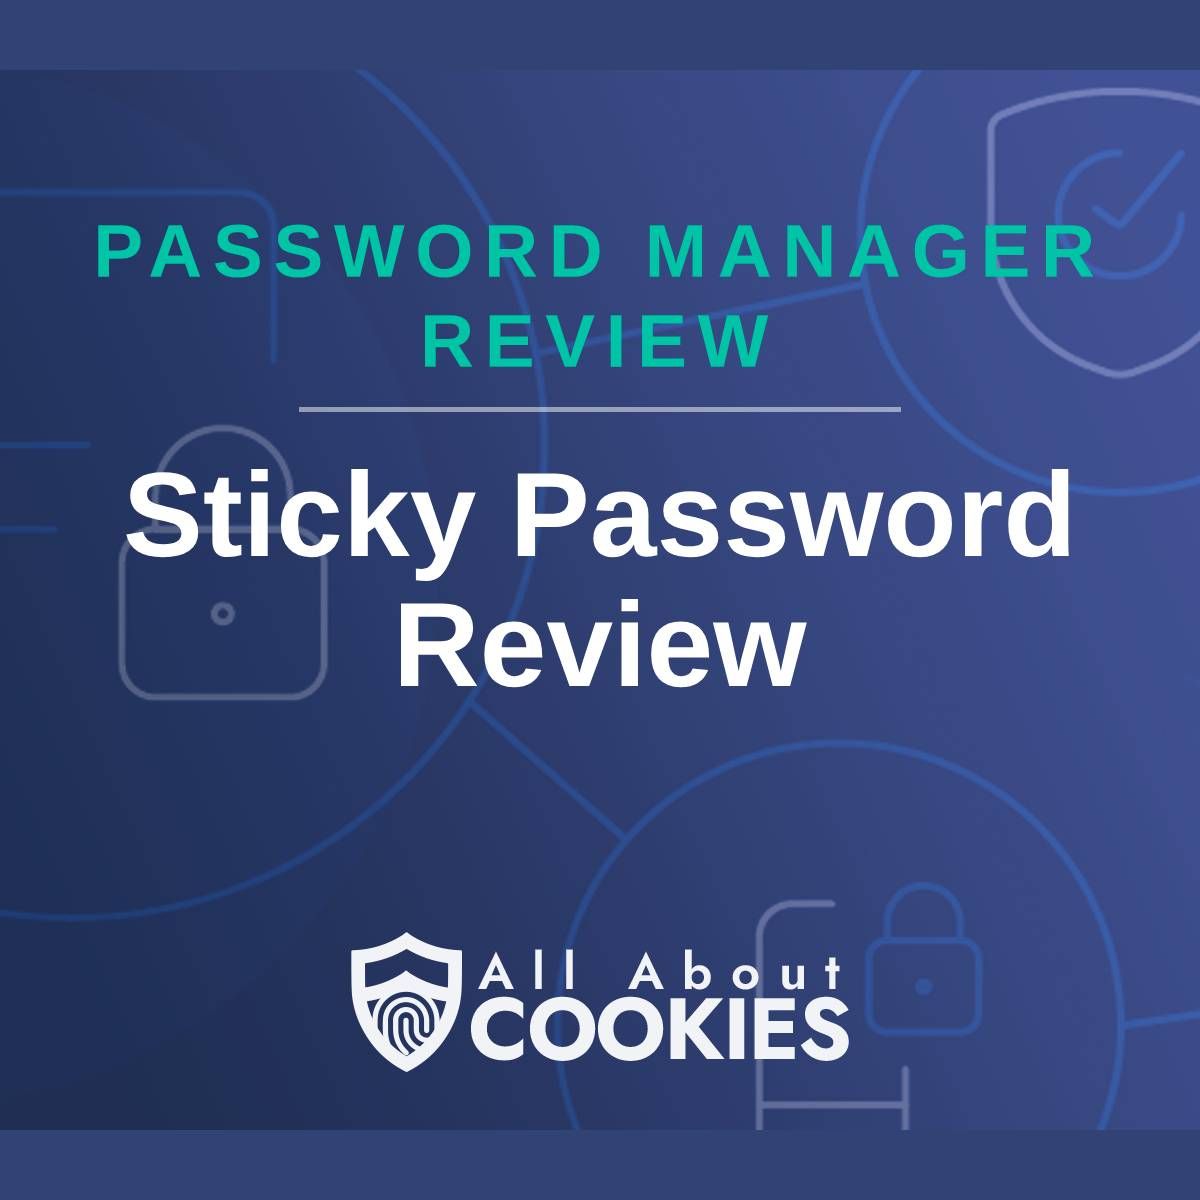 A blue background with images of locks and shields with the text &quot;Password Manager Review Sticky Password Review&quot; and the All About Cookies logo. 